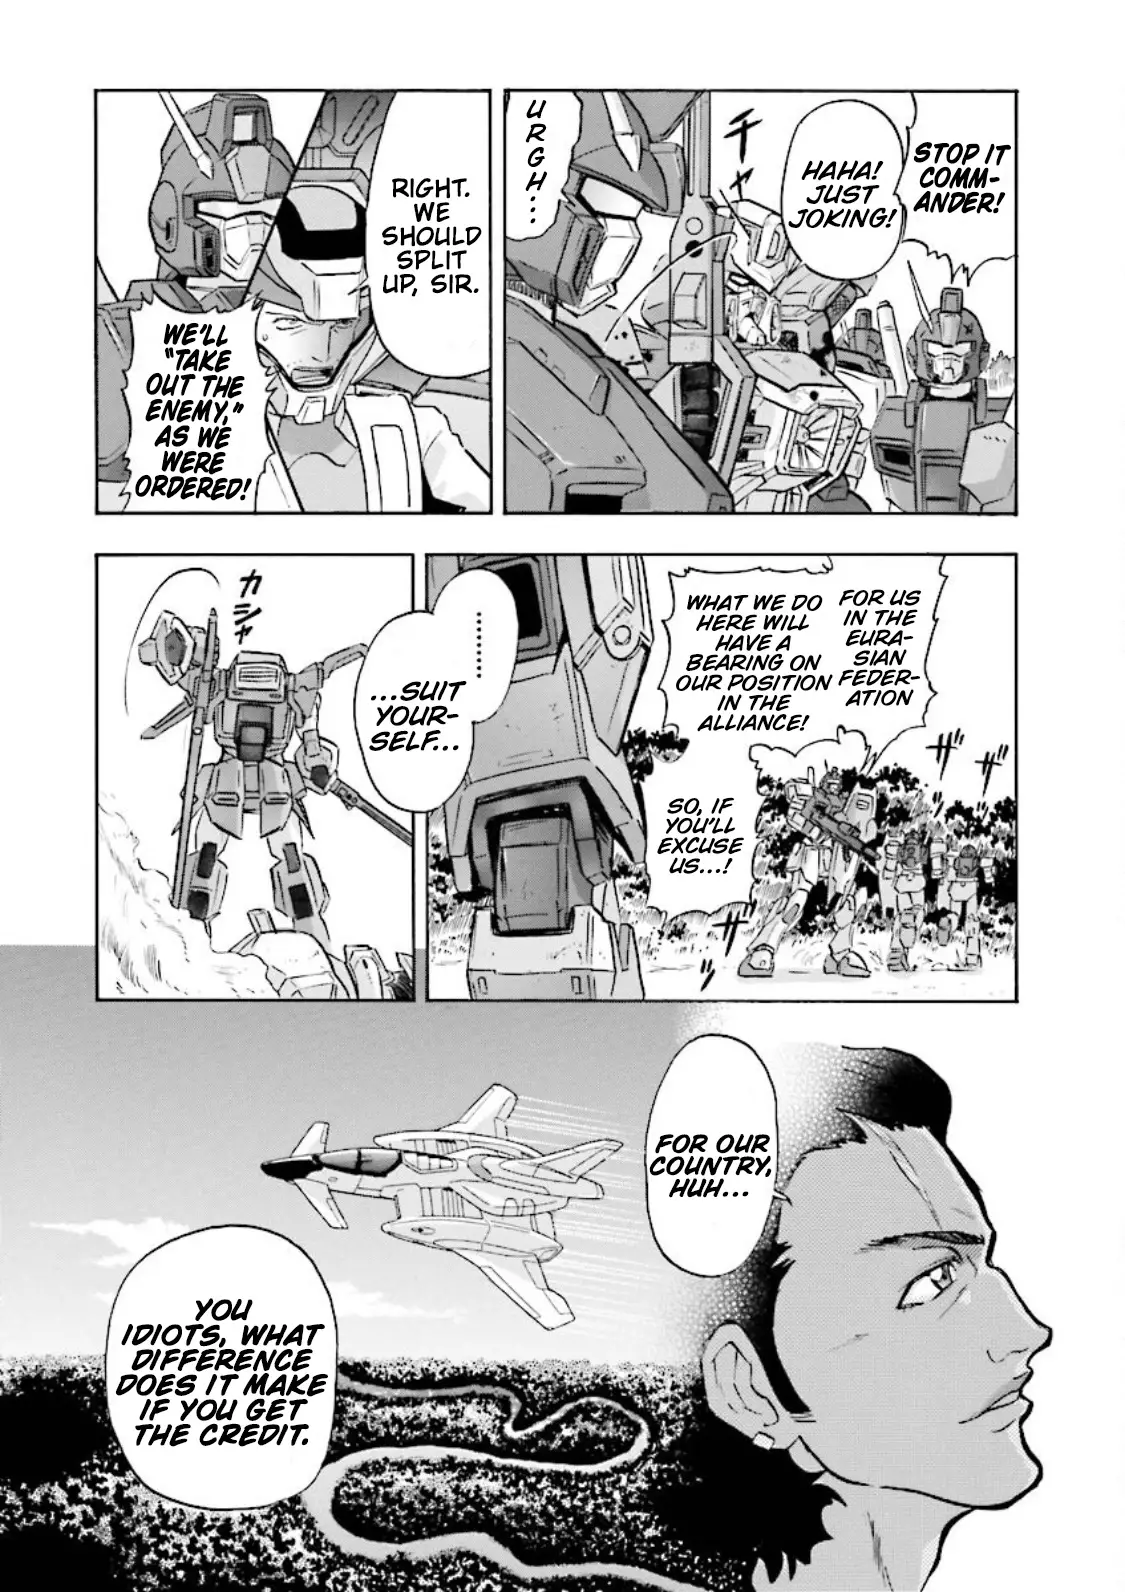 Mobile Suit Gundam Seed Astray Re:master Edition - 13 page 5-7108fd3e